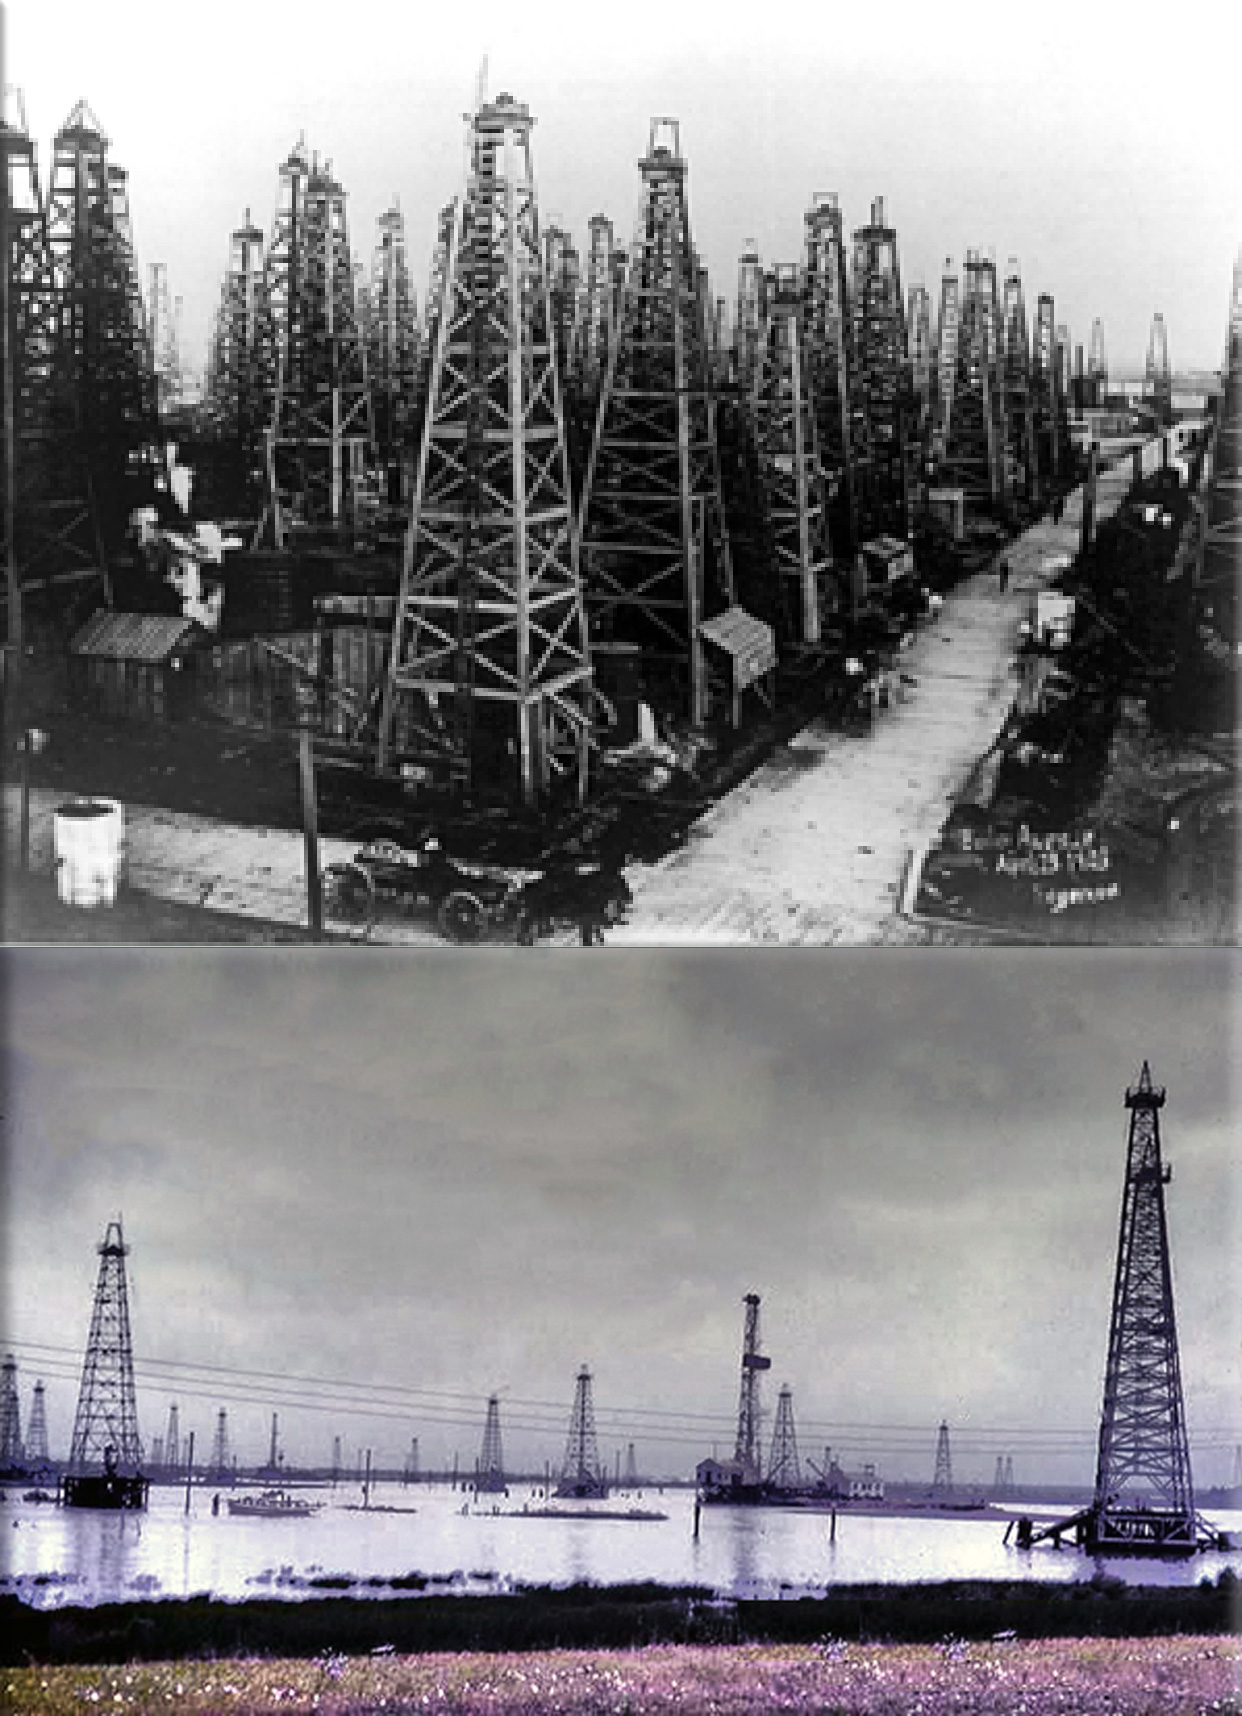 Spindletop's Boiler Avenue, 1903, Spindletop is a salt dome oil field located in the southern portion of Beaumont, Texas (The Spindletop dome was derived from the Louann Salt evaporite layer of the Jurassic geologic period), credit Priweb.org, W.W.Bryant